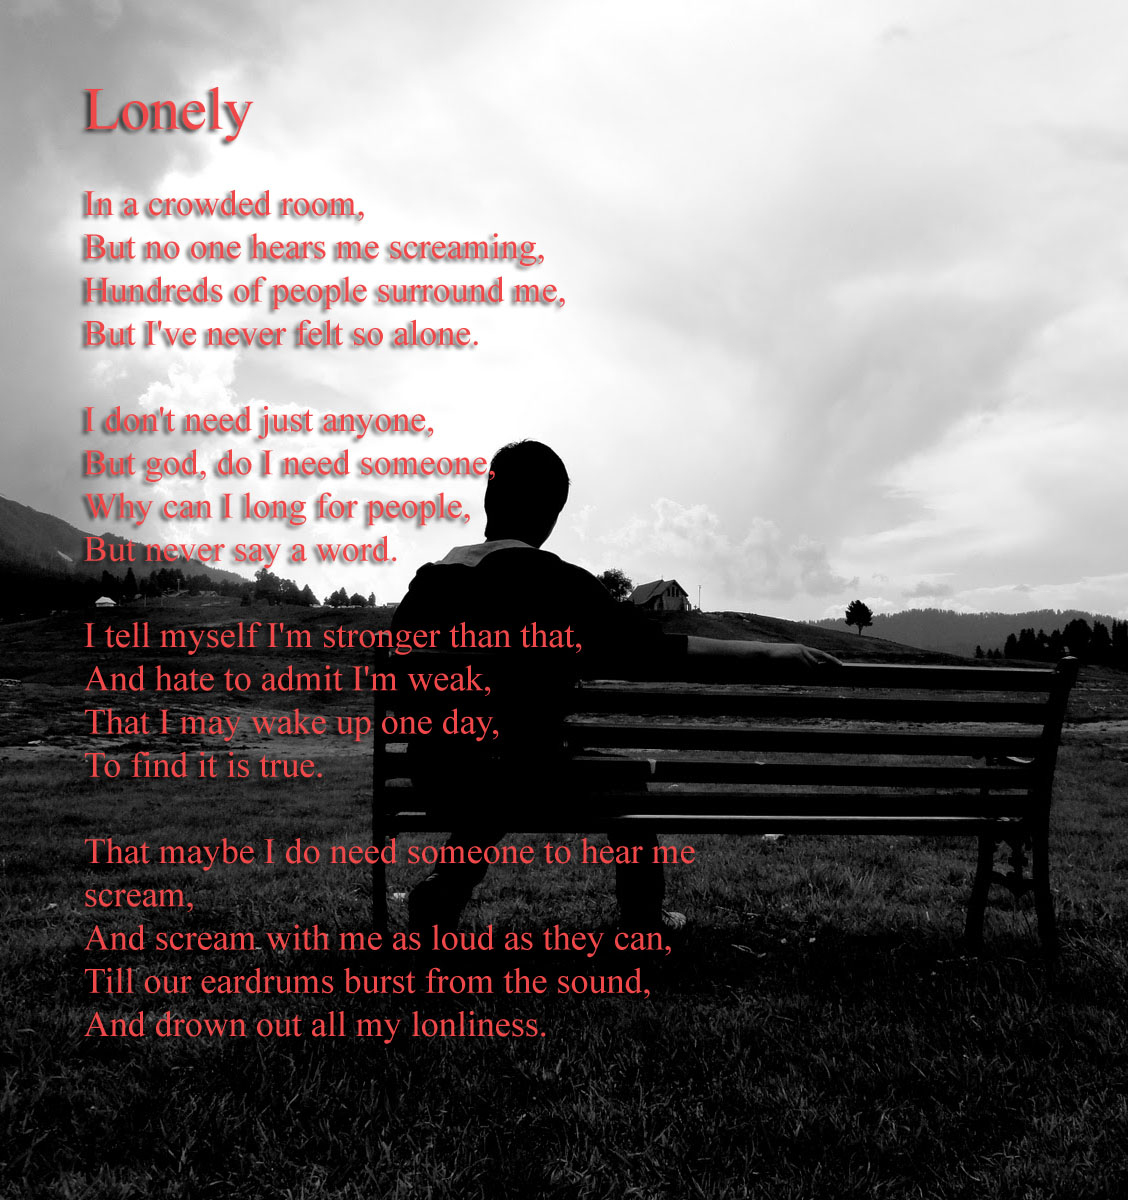 Poems on loneliness and love